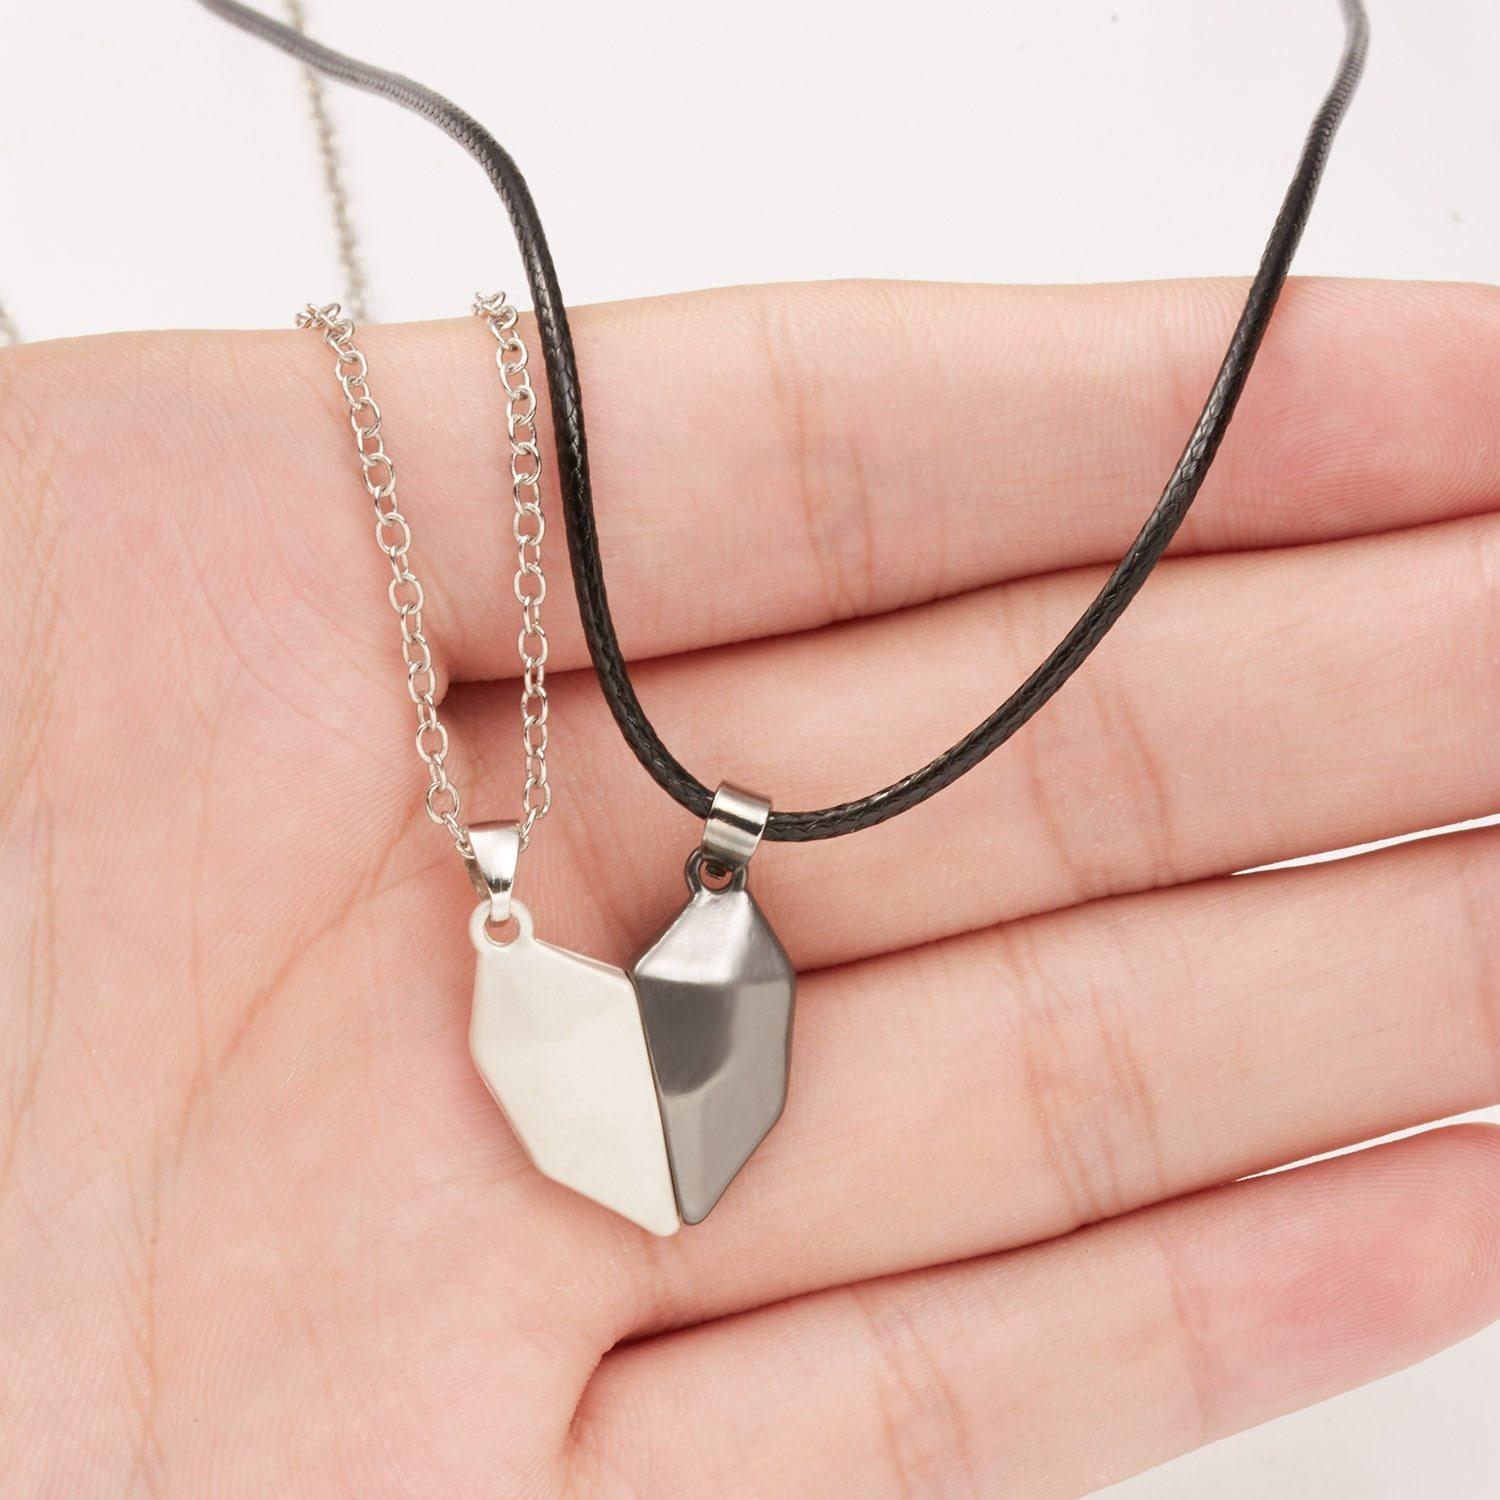 Matching Relationship Necklaces For My Girlfriend for Christmas 2023 | Matching Relationship Necklaces For My Girlfriend - undefined | gift, gift ideas, Magnetic Couple Necklace, necklace, Necklaces, other necklace | From Hunny Life | hunnylife.com